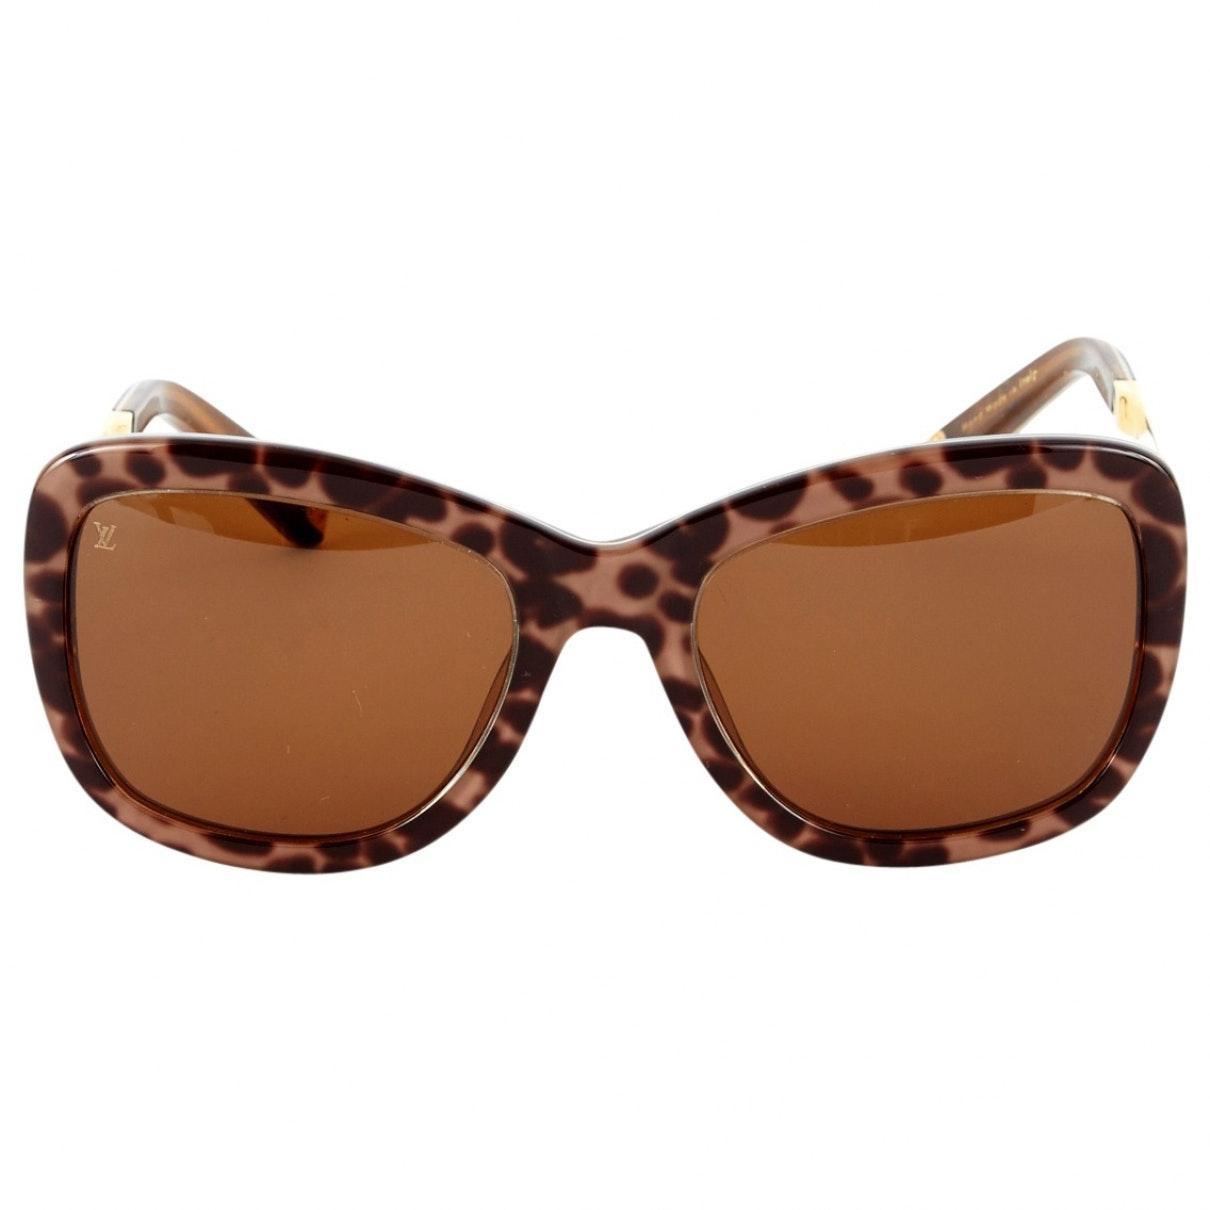 Louis Vuitton Pre-owned Sunglasses in Brown - Lyst